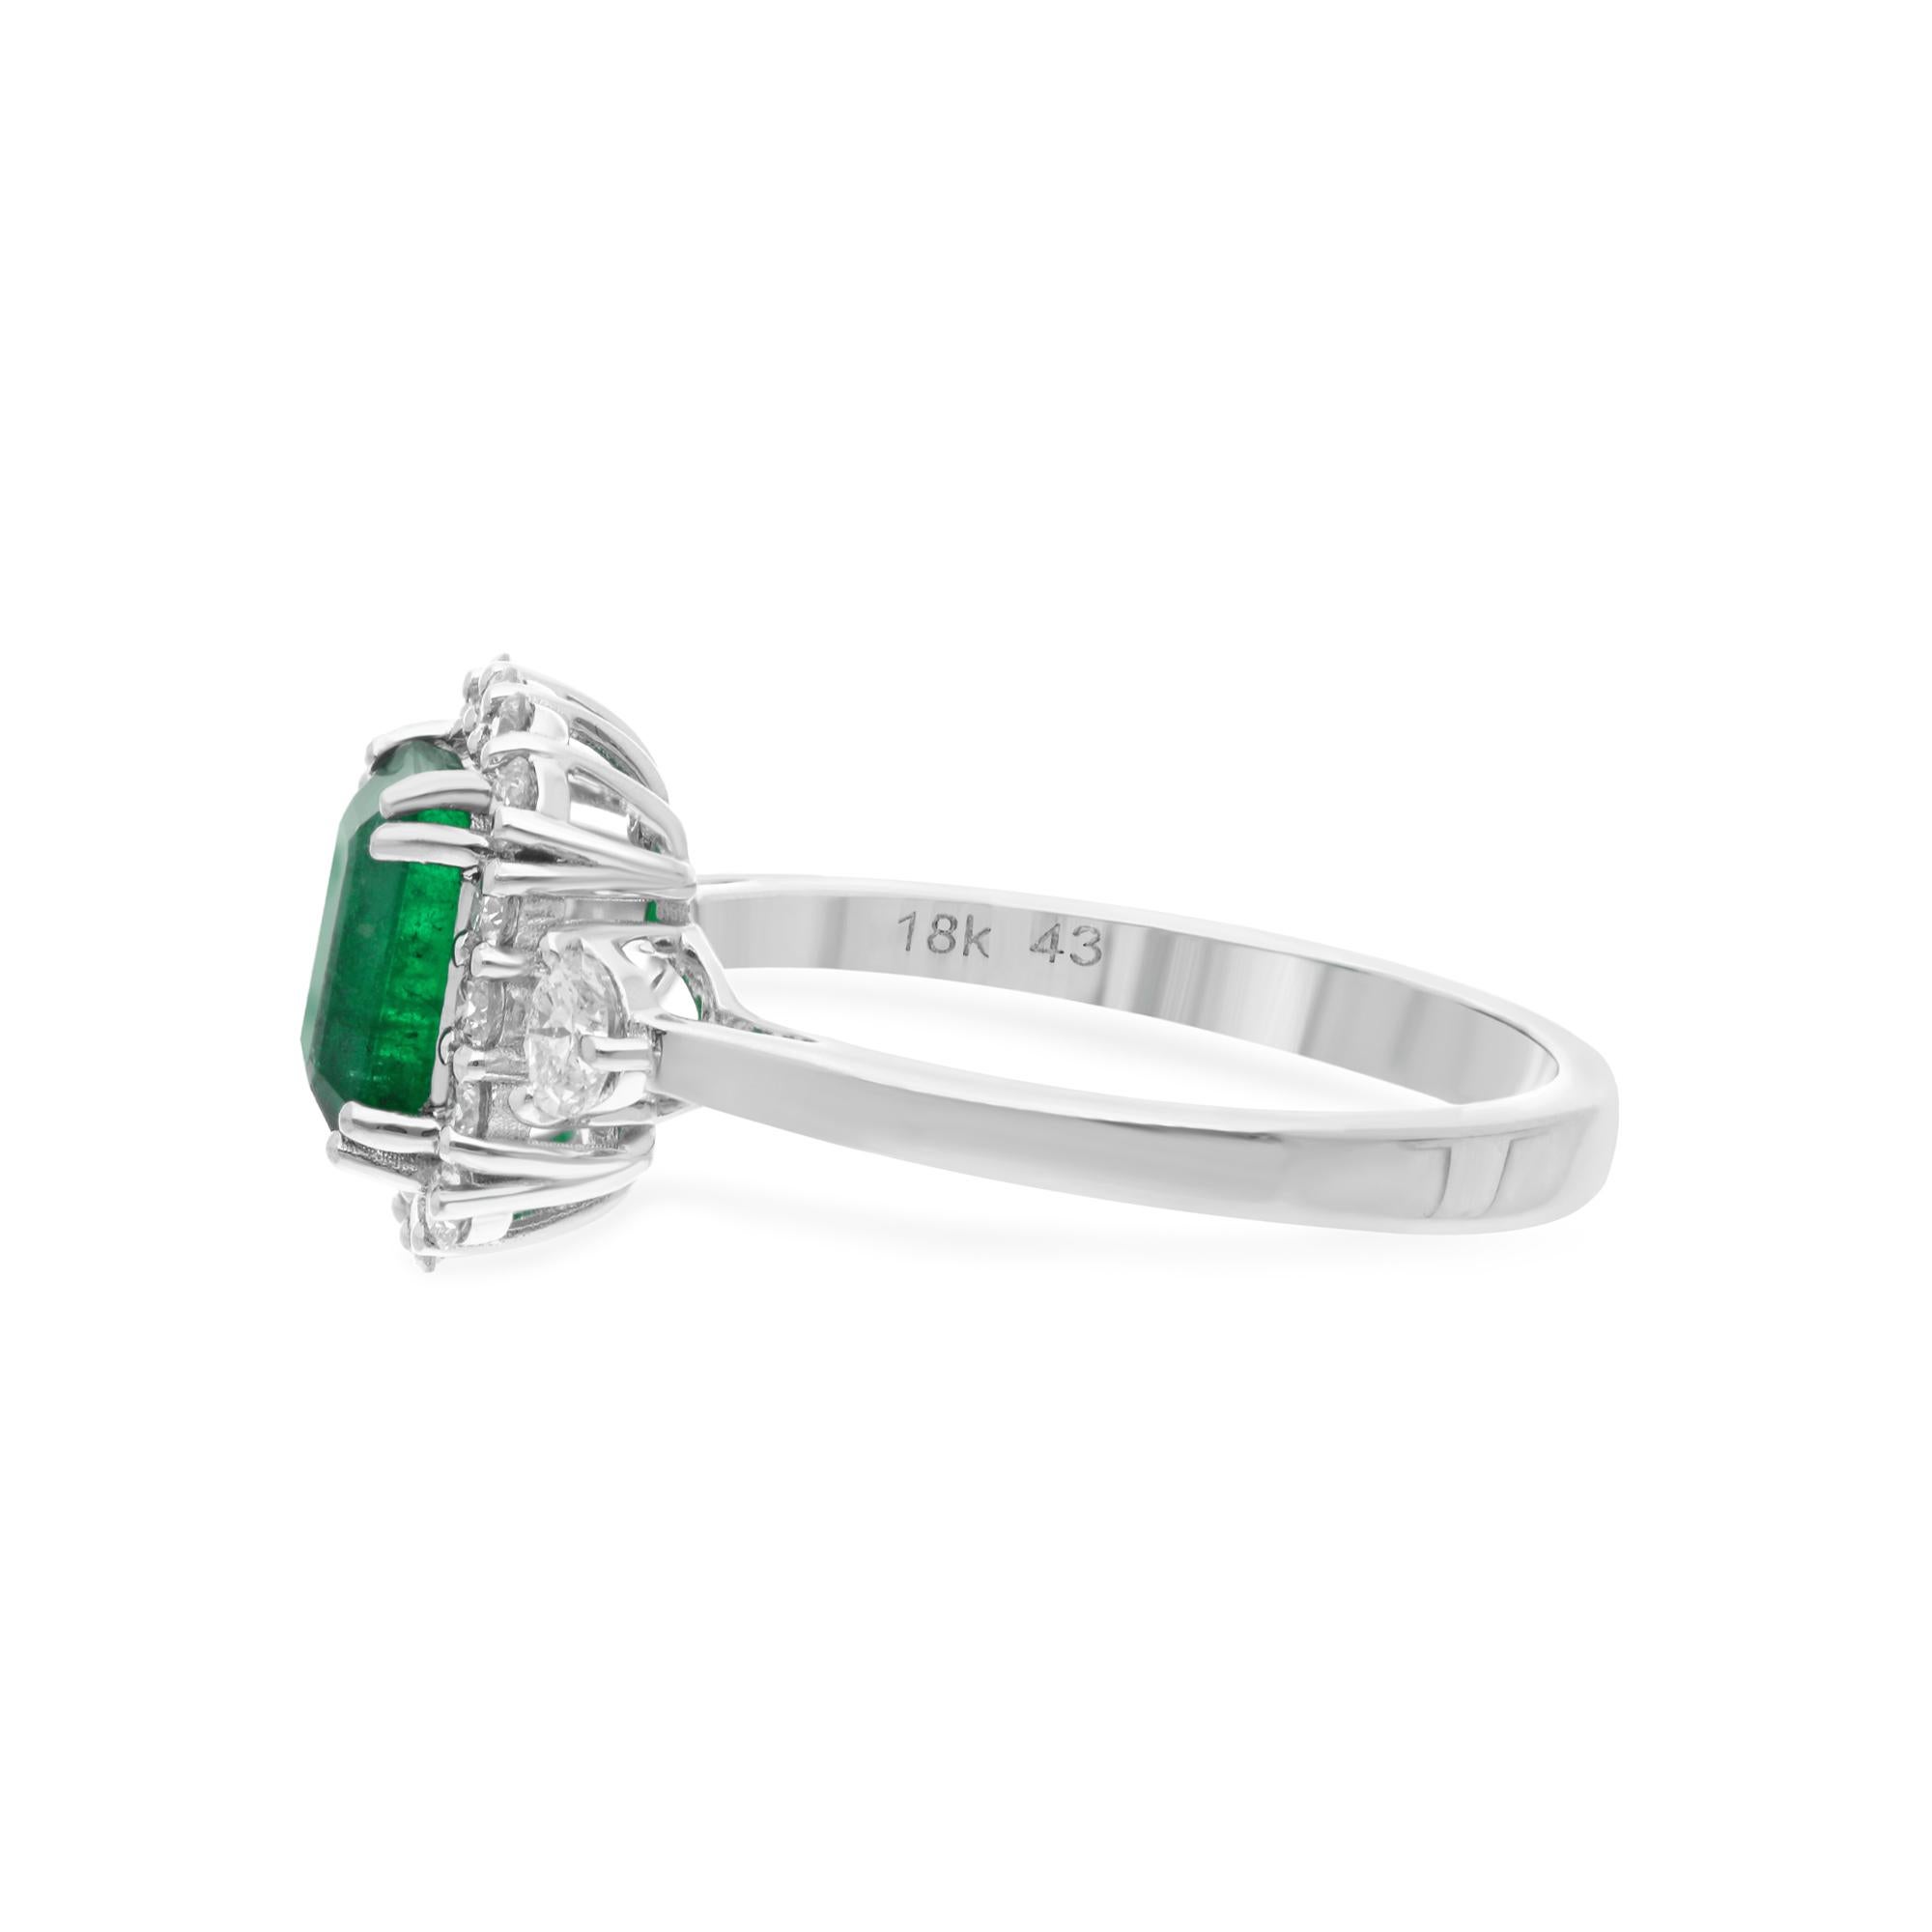 Item Code :- SER-22881A (14k)
Gross Wt. :- 3.21 gm
14k Solid White Gold Wt. :- 2.81 gm
Natural Diamond Wt. :- 0.55 Ct. ( AVERAGE DIAMOND CLARITY SI1-SI2 & COLOR H-I )
Emerald Wt. :- 1.43 Ct.
Ring Size :- 7 US & All size available

✦